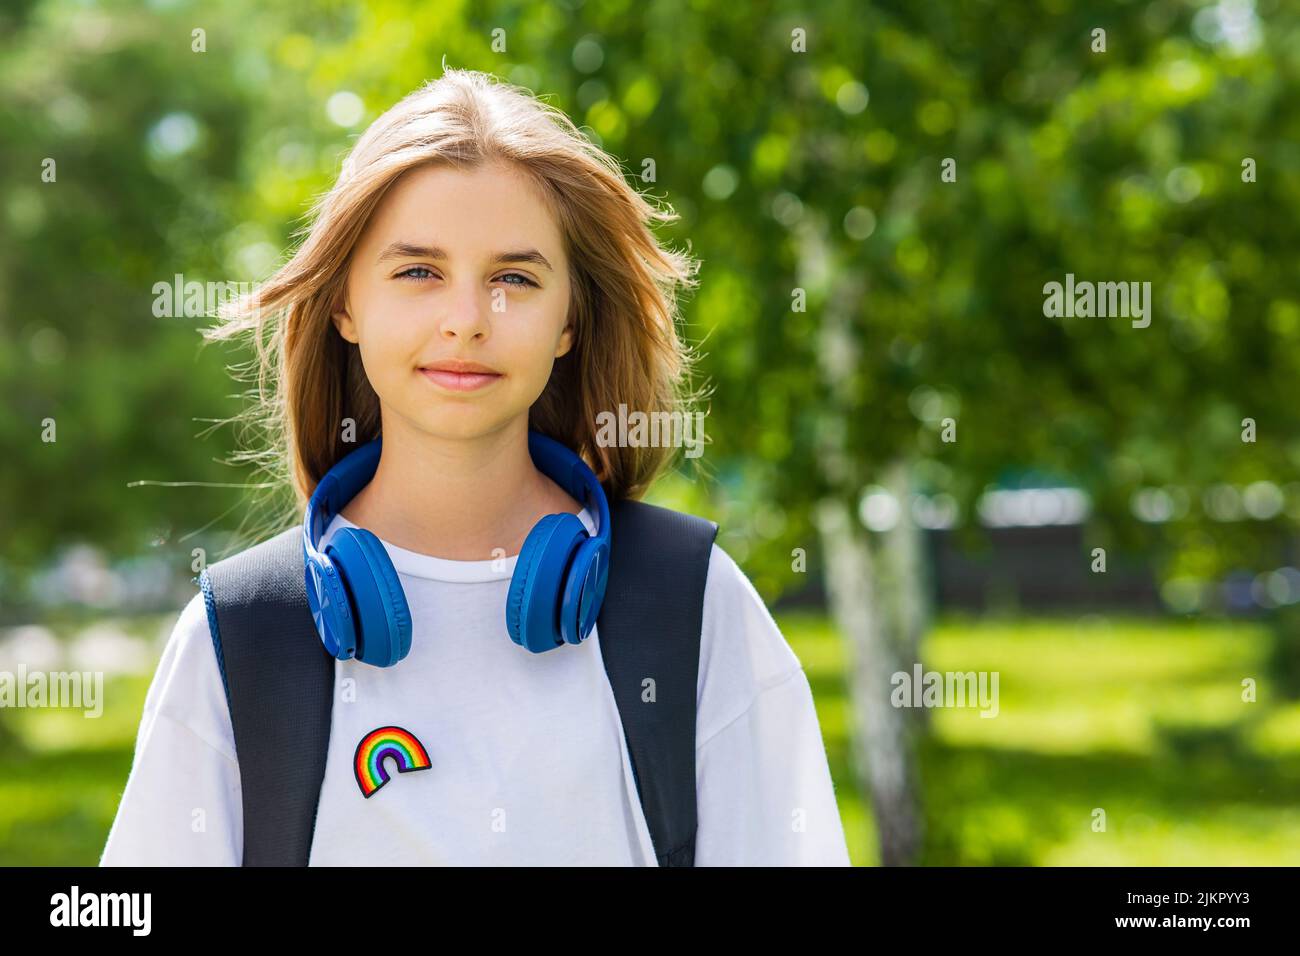 teen age girl with backpack and headset in park back to school concept Stock Photo